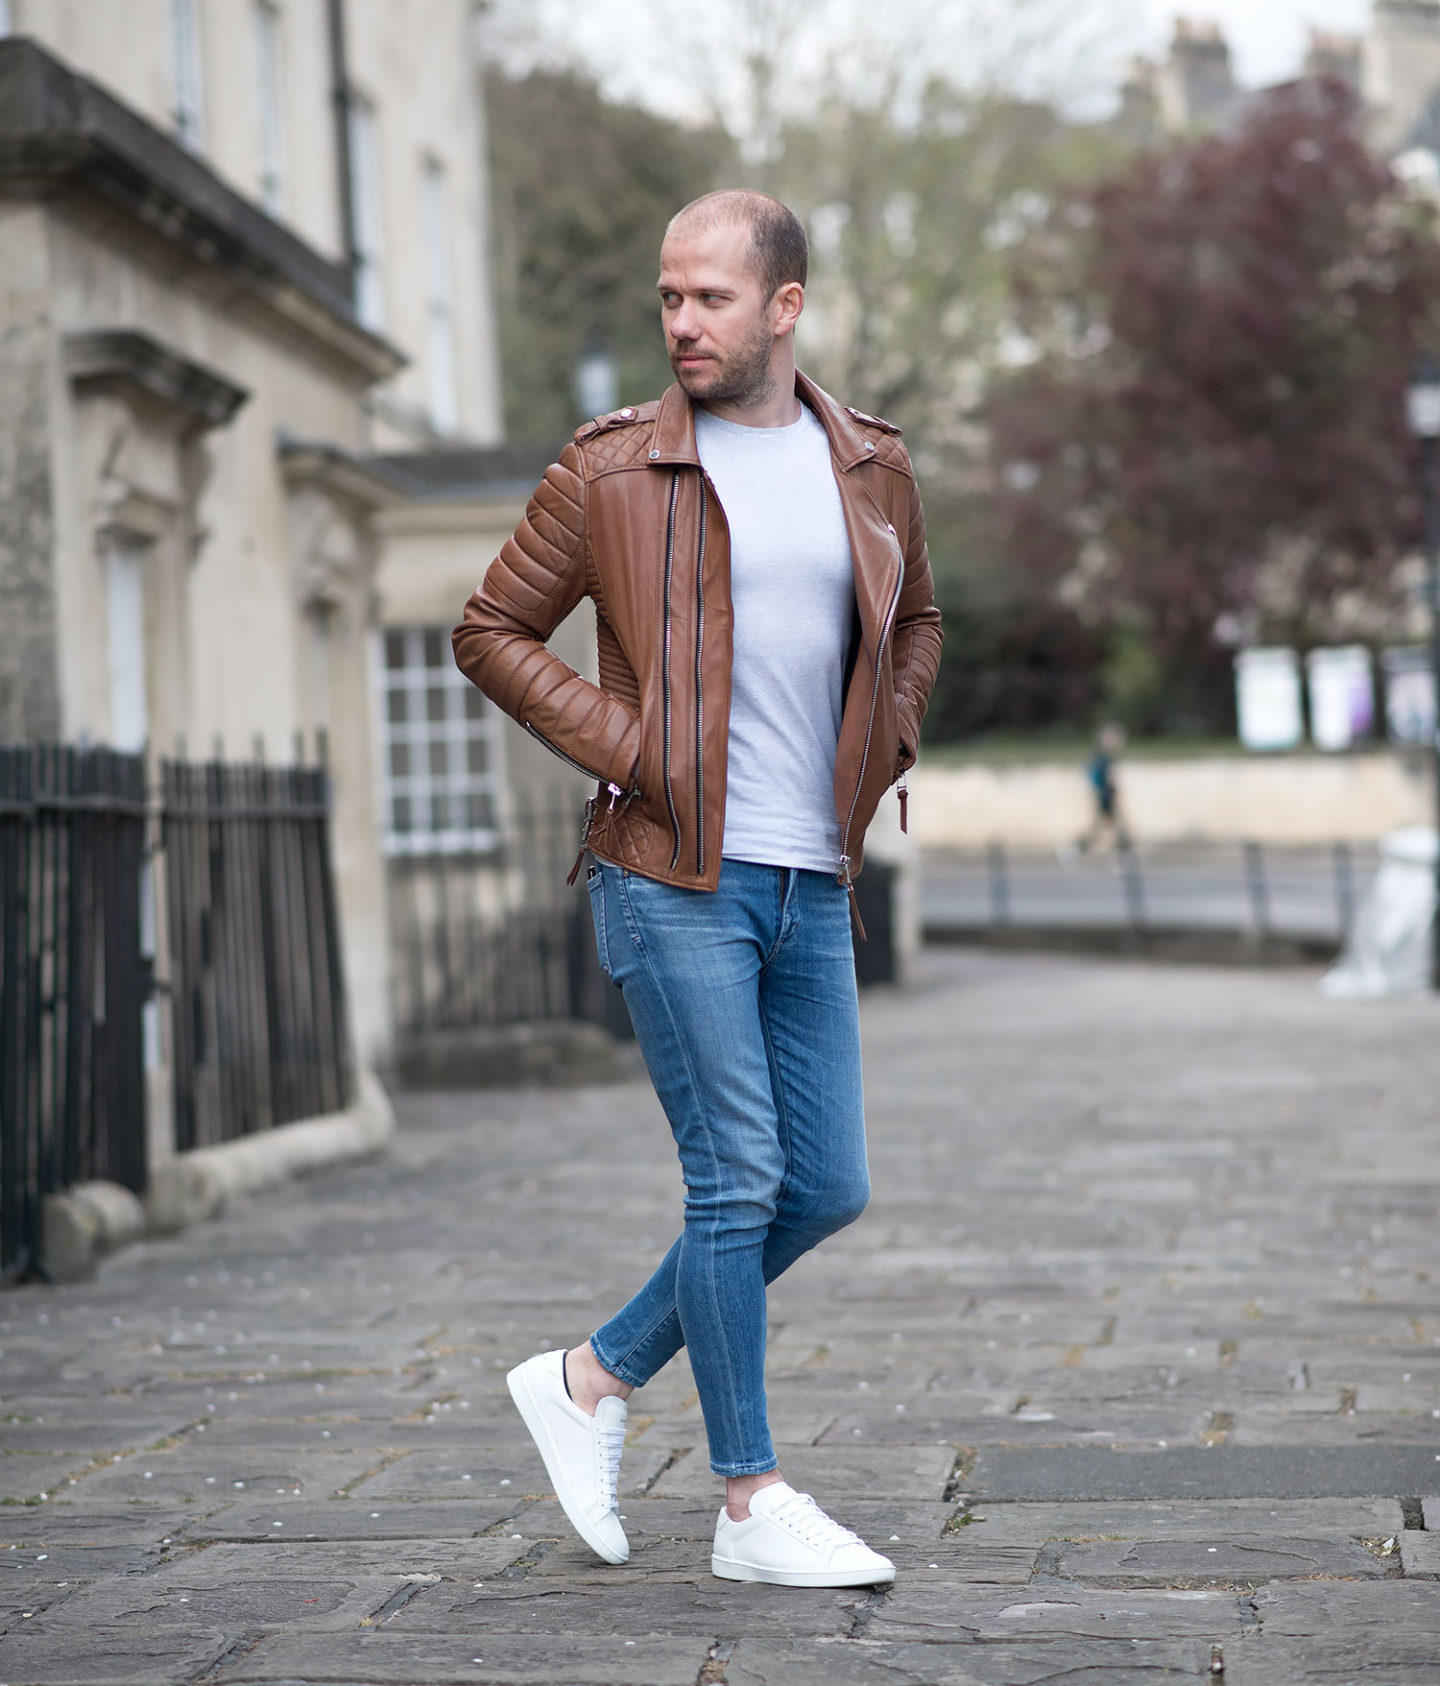 Women’s Skinny Jeans For Men – Tim’s Top 5 Pairs - THE JEANS BLOG